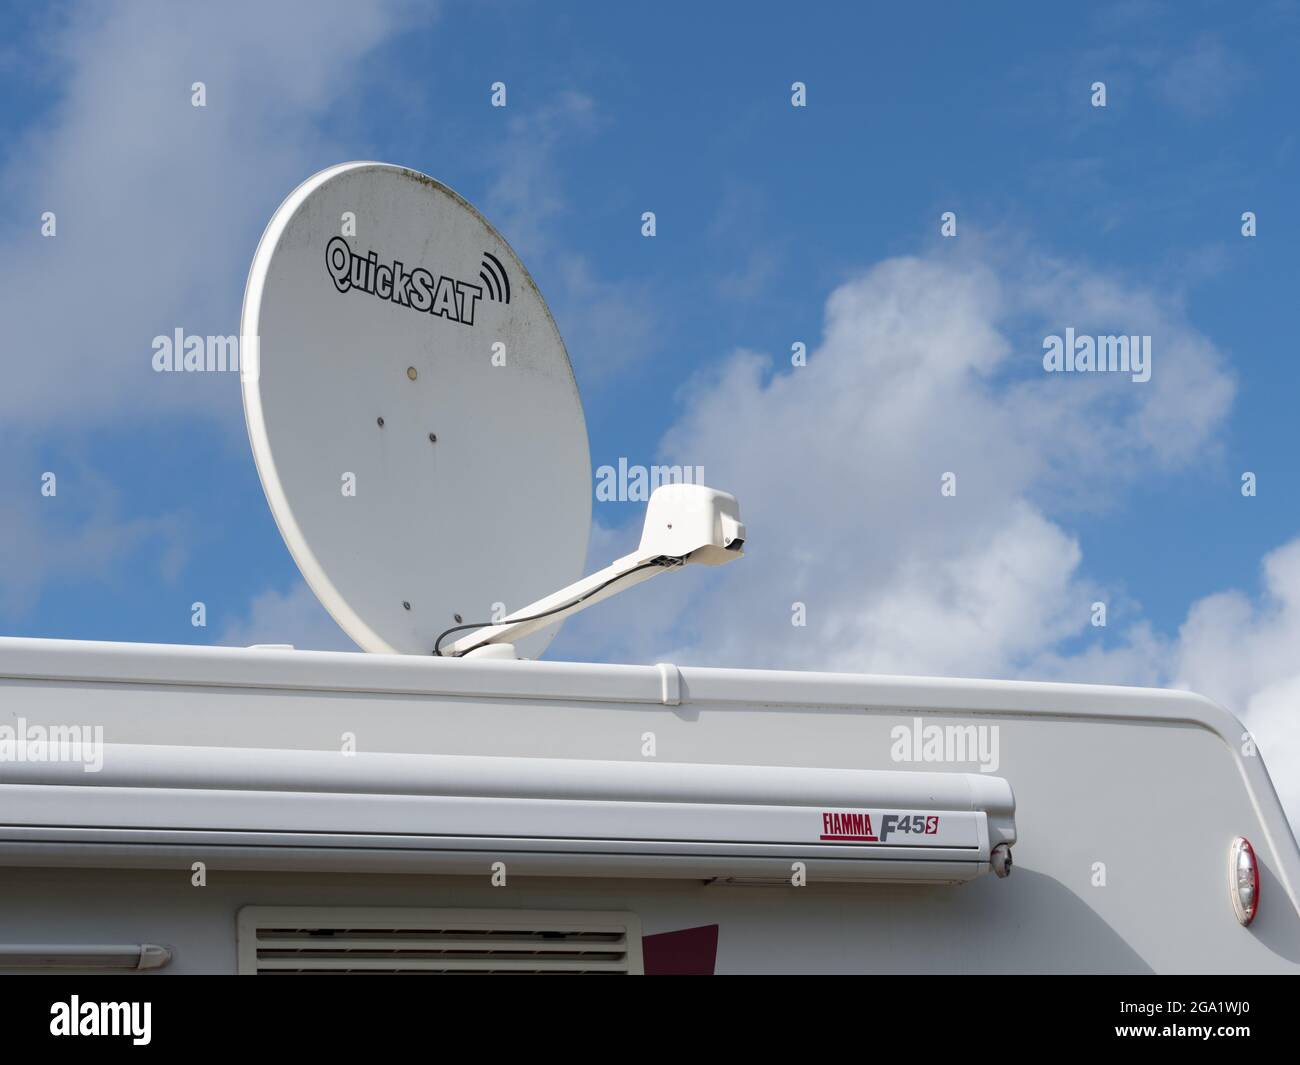 A large roof top satellite dish made by Quicksat on top of a motorhome recreational vehicle against a blue sunny sky Stock Photo